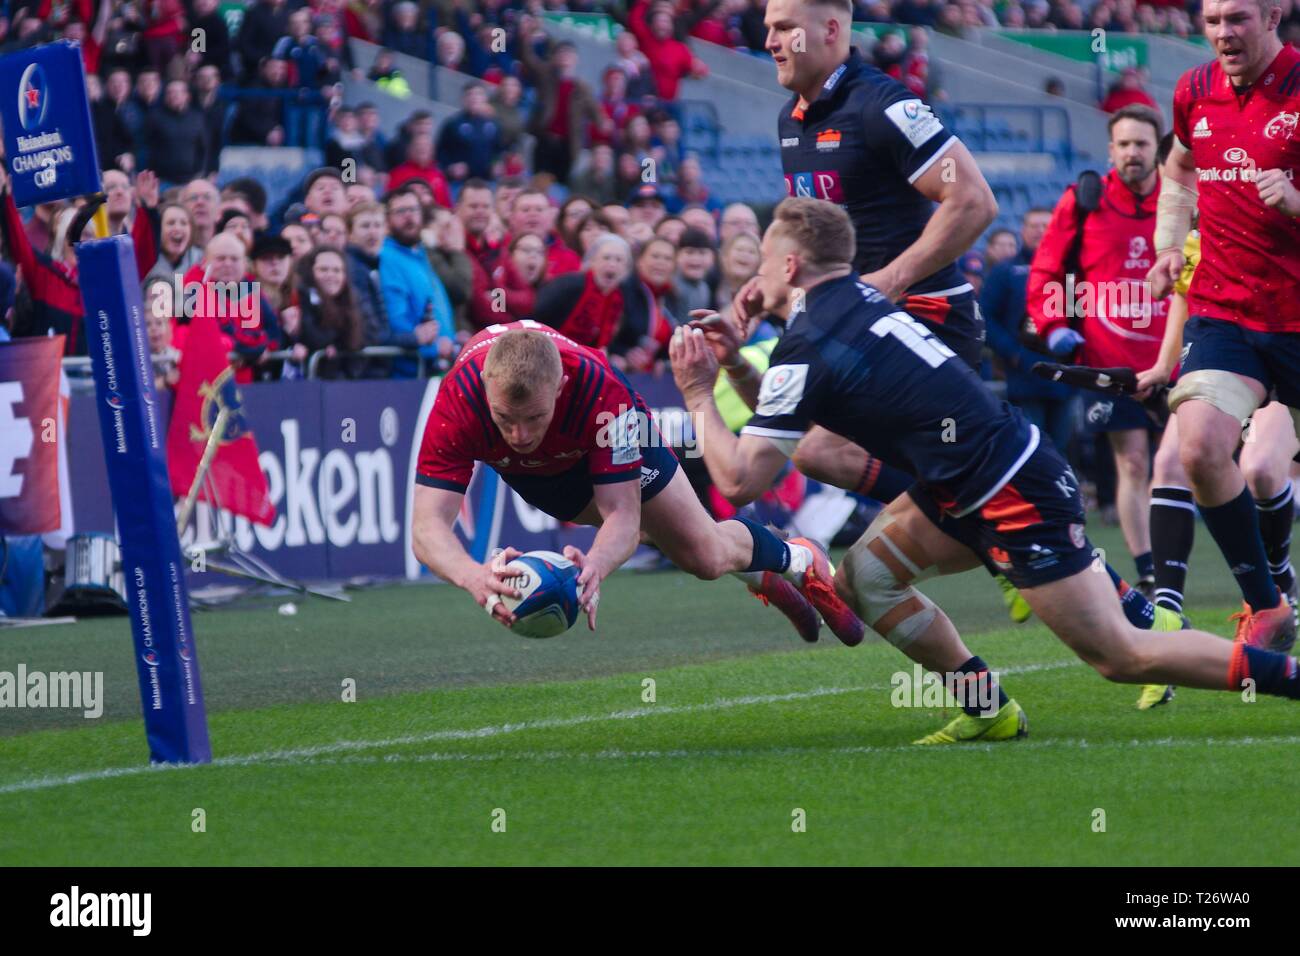 Edinburgh, Scotland, 30 March 2019. Keith Earls scoring a try for Munster  Rugby against Edinburgh Rugby in the quarter final of the Heineken  Champions Cup at BT Murrayfield Stadium, Edinburgh. Credit: Colin